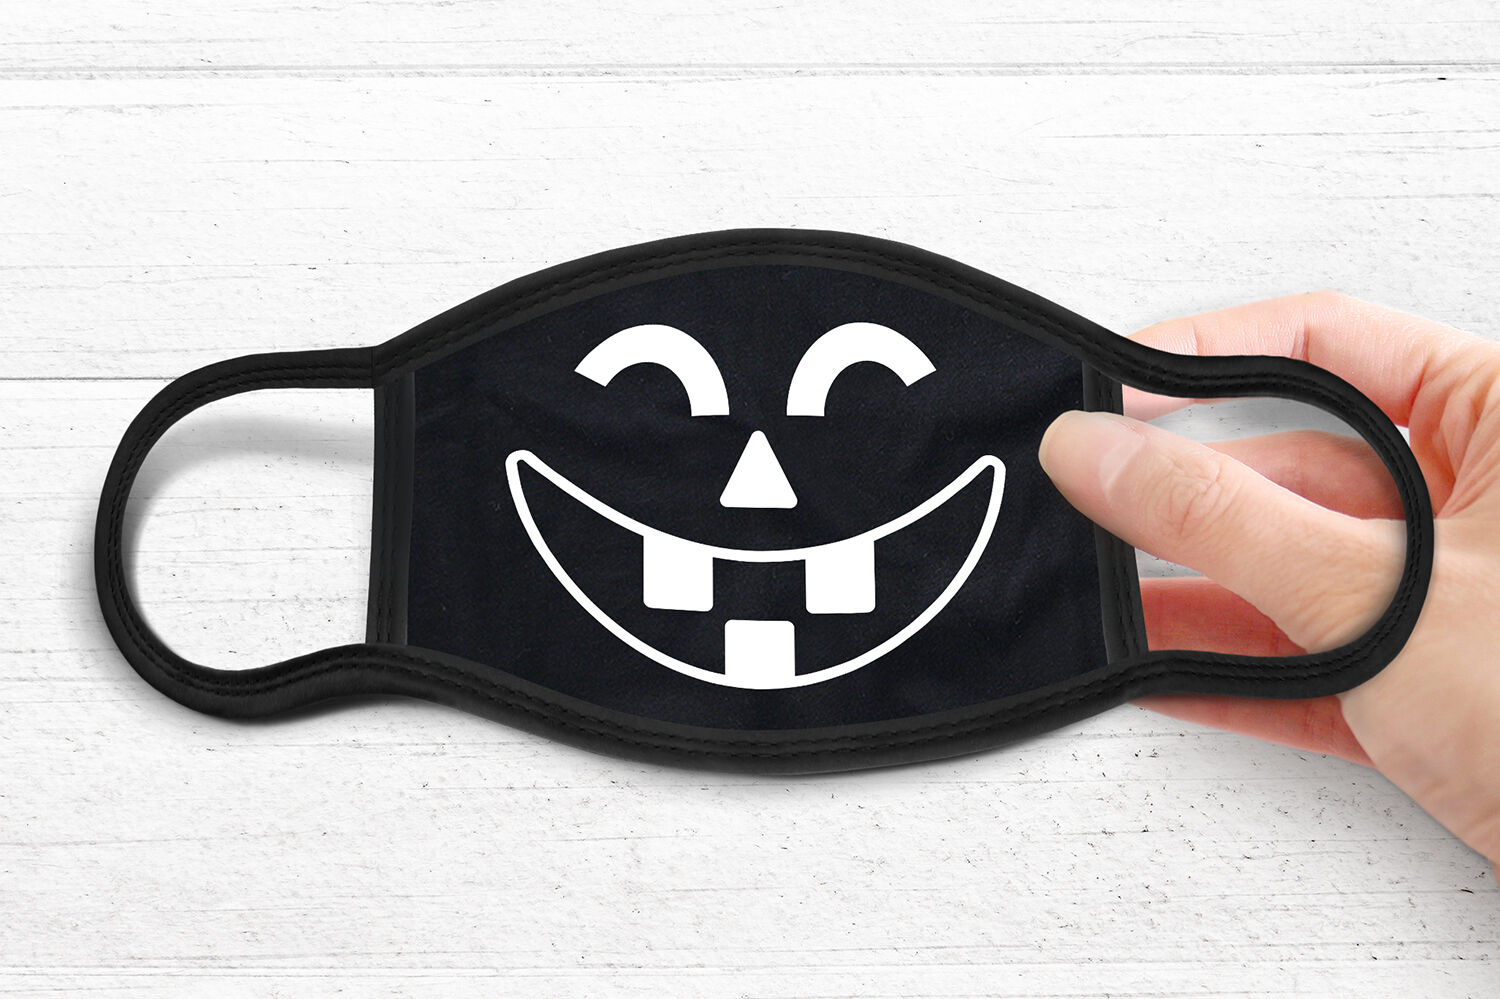 Halloween Design For Masks Halloween Mask Svg Dxf Eps Png By Craftlabsvg Thehungryjpeg Com